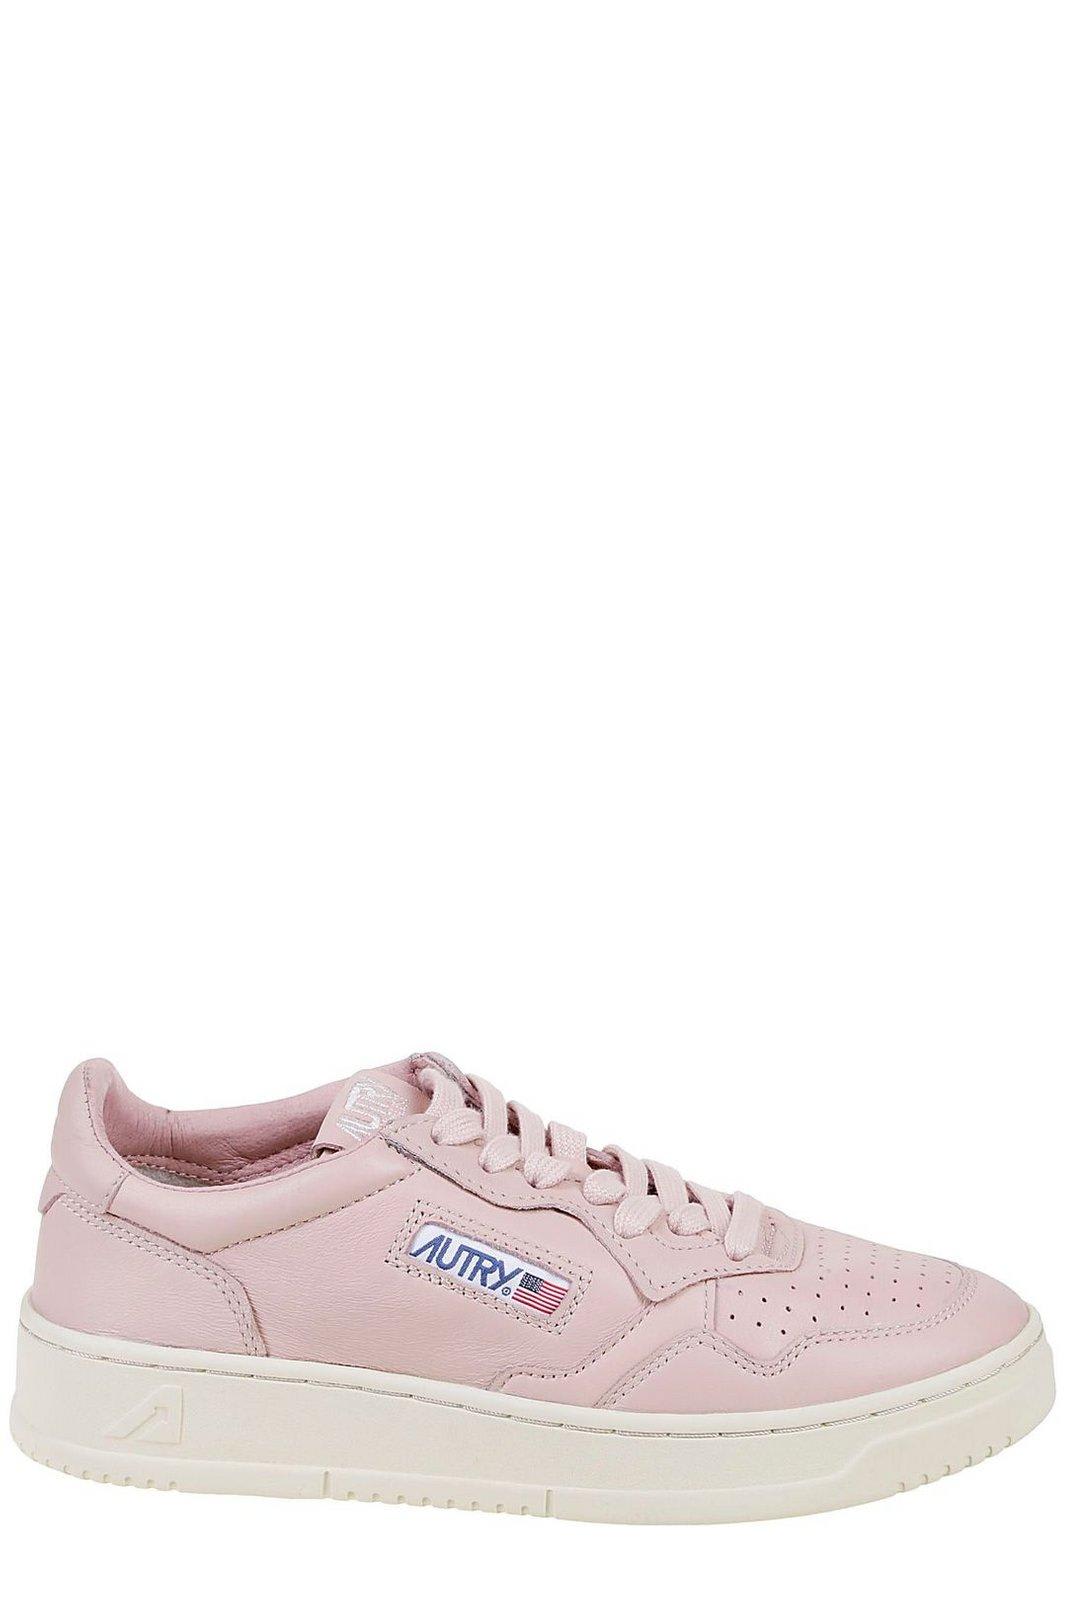 Autry Round Toe Lace-up Sneakers In Peach